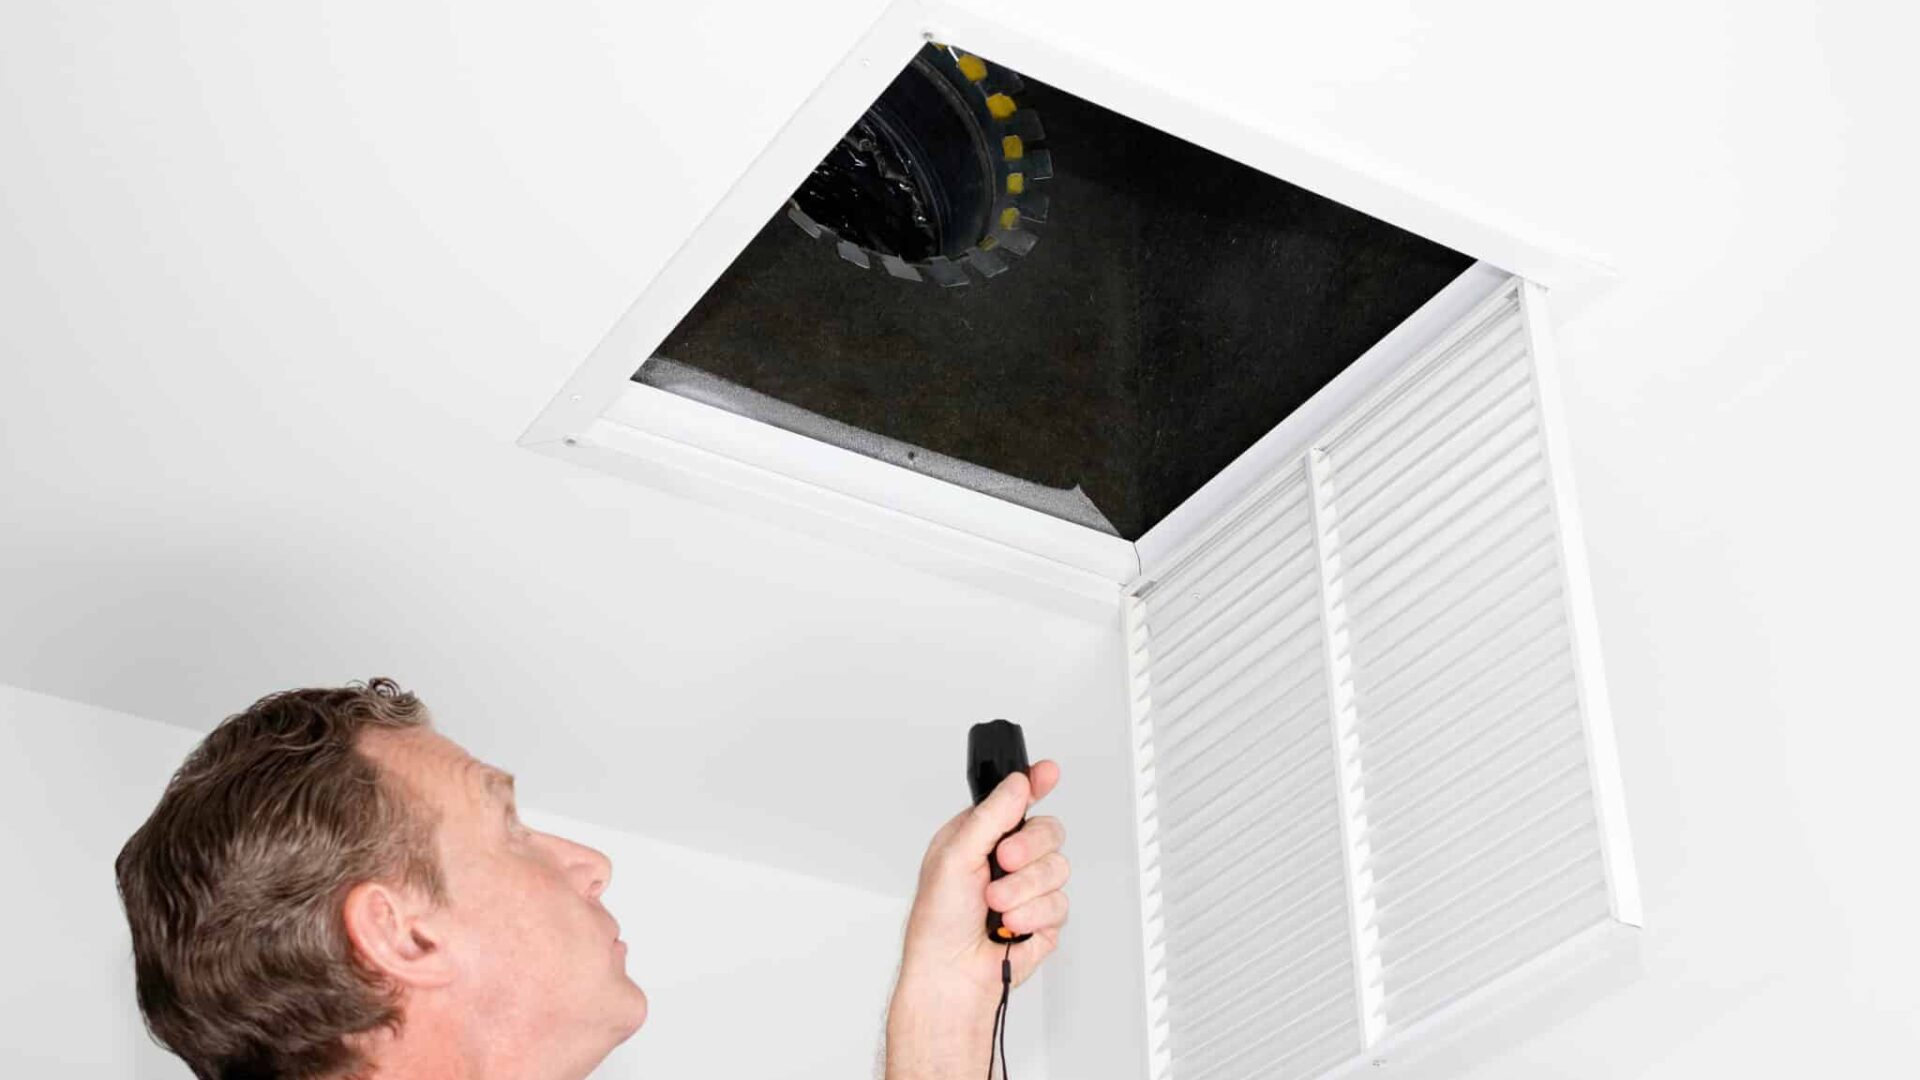 Male looking up into a ceiling air intake duct with a flashlight checking for maintenance. Person with a flashlight examining with a square opening of a home HVAC system